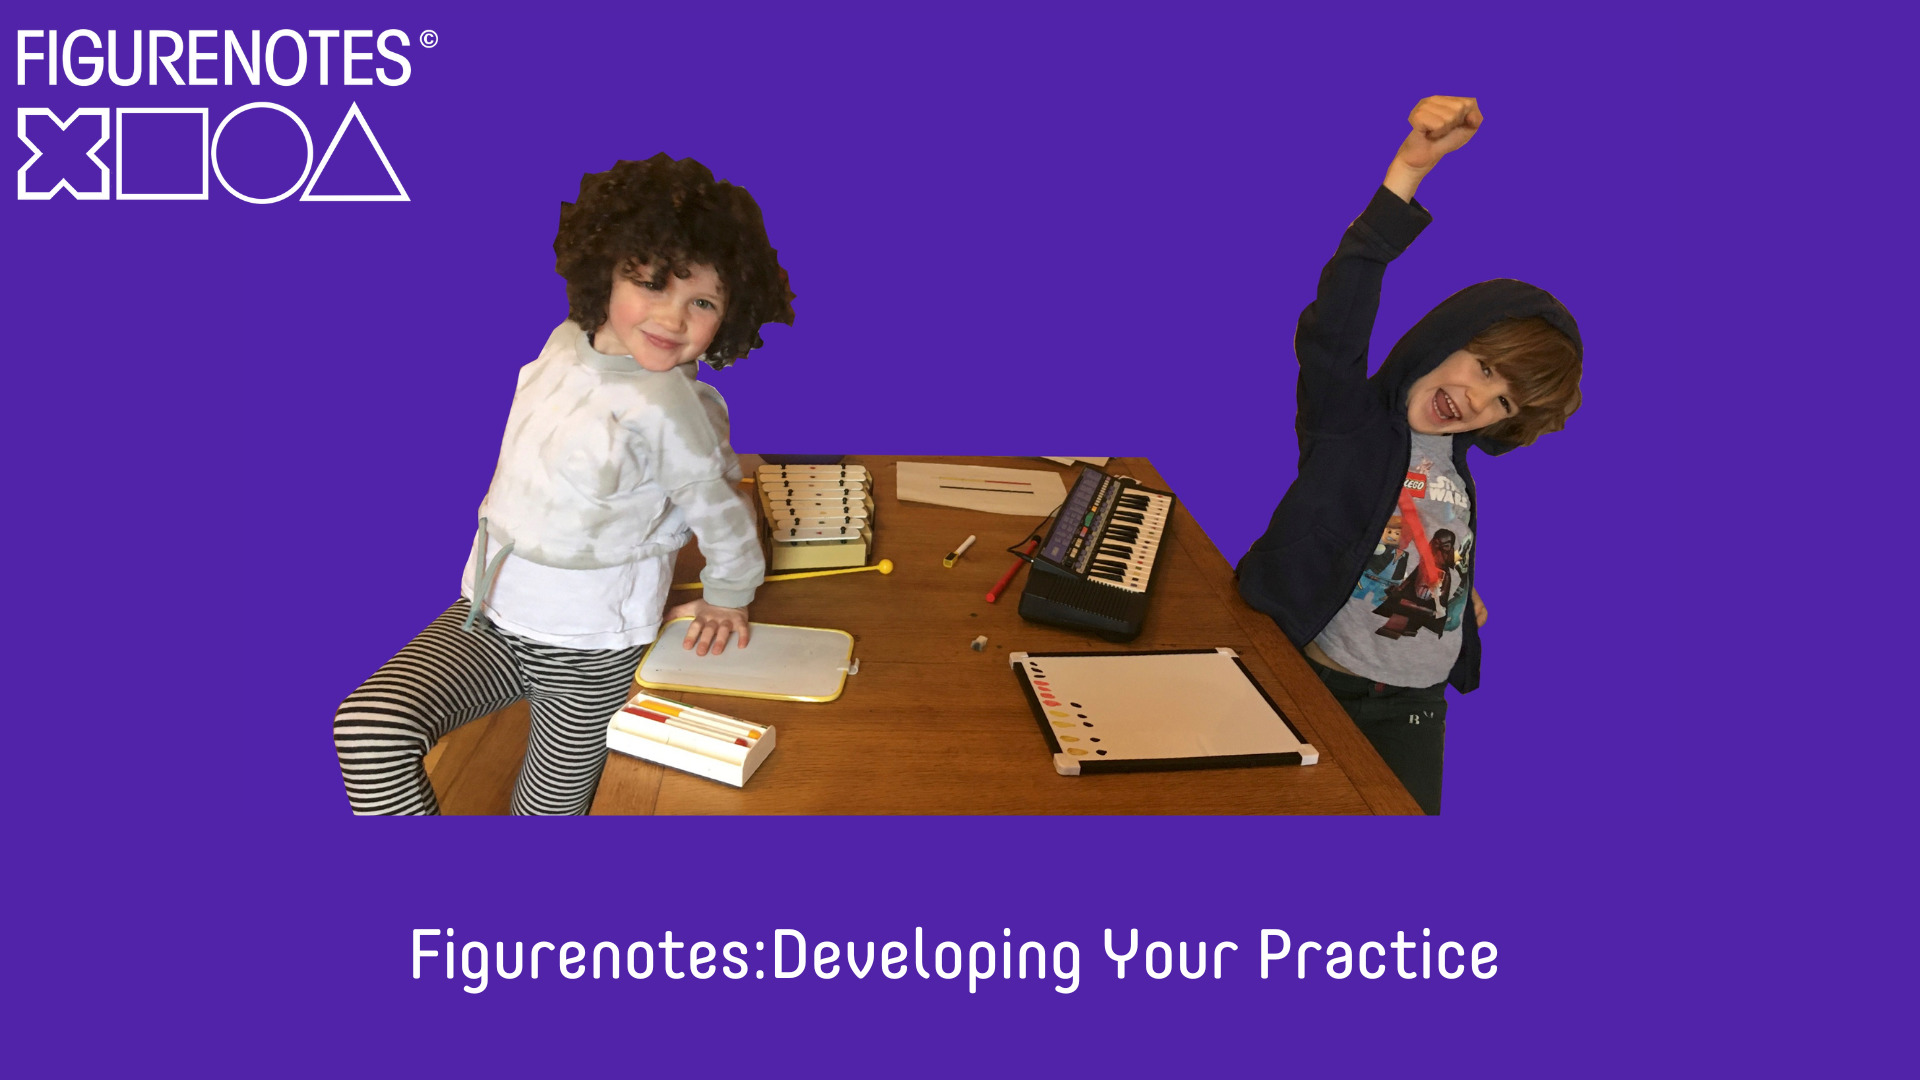 2 children using figurenoted instruments looking happy and the title Figurenotes Developing your practice